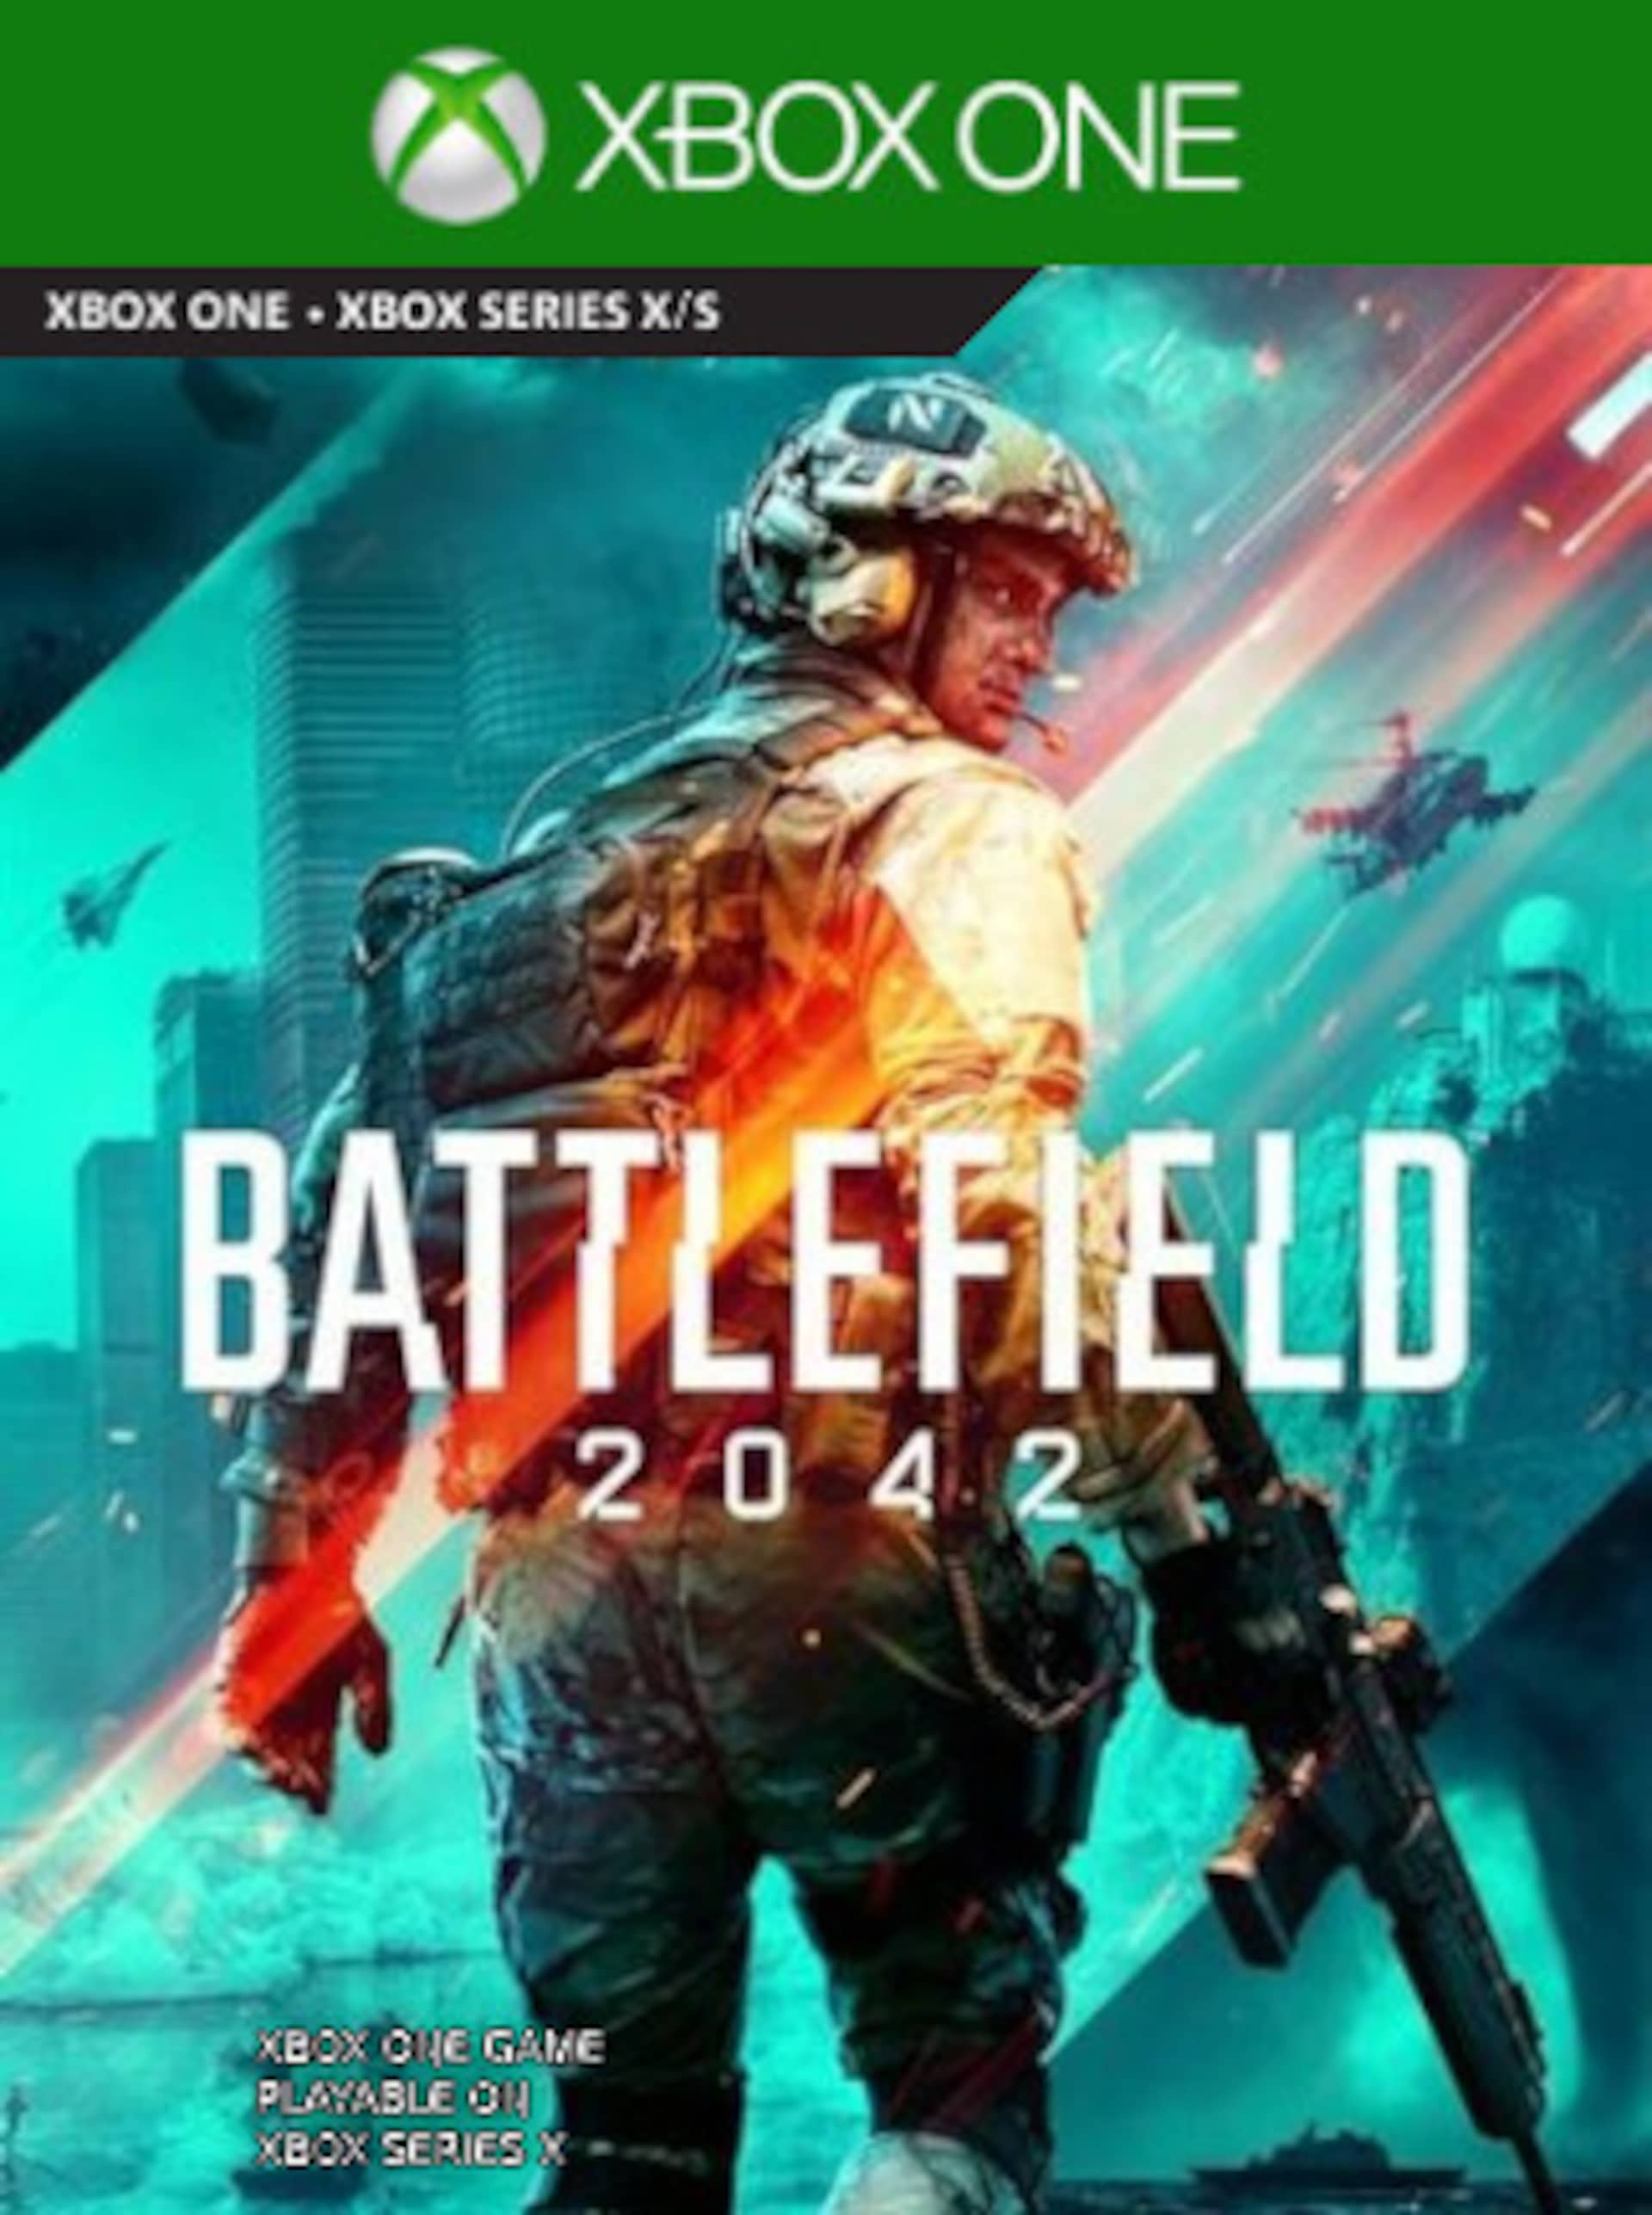 2042 is on sale for $19.79 on Steam till Feb 2nd. : r/Battlefield